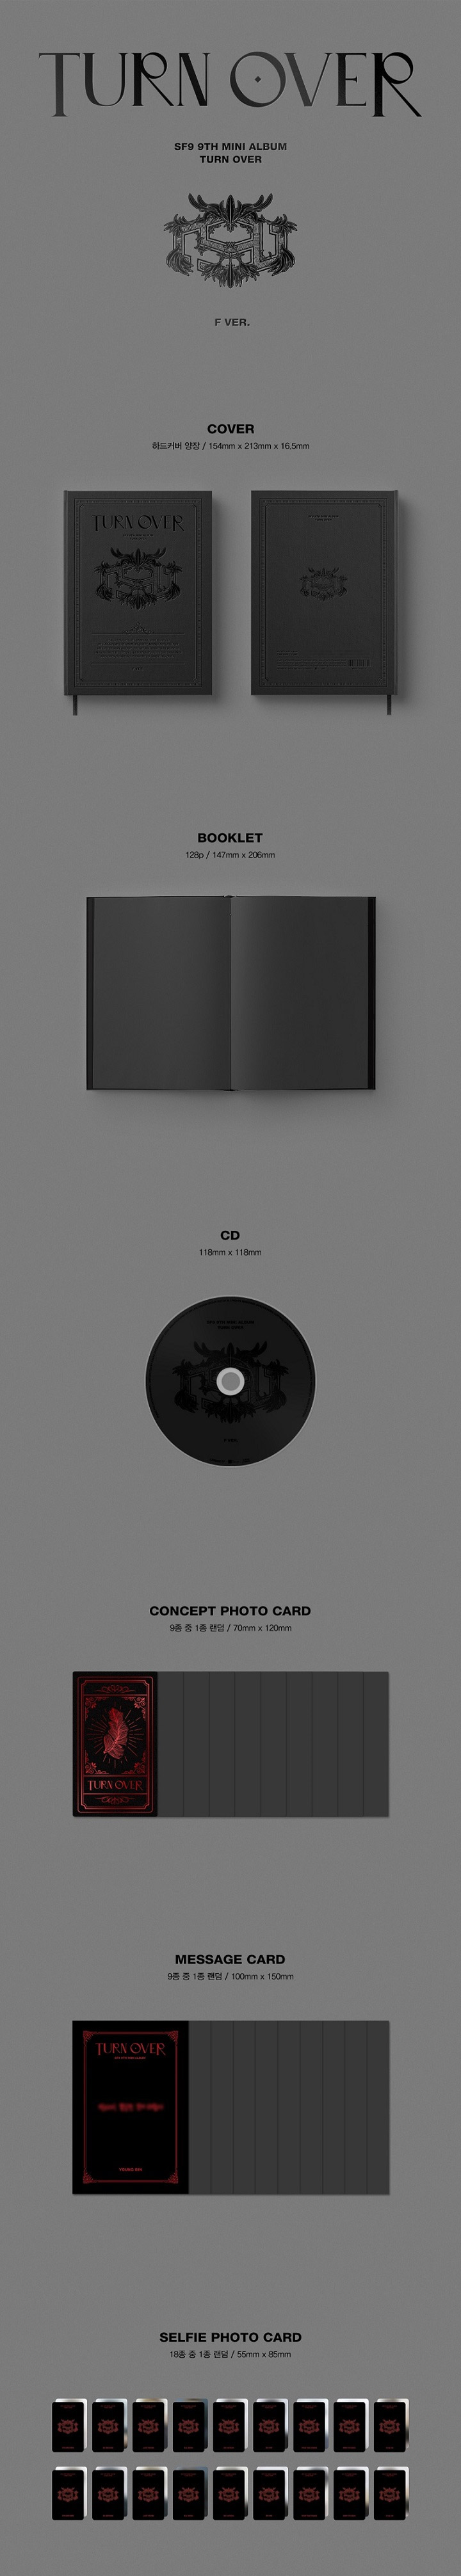 SF9 Turn Over 9th Mini Album Normal Ver 9 Cover CD+1p Poster+128p Booklet+1p Concept PhotoCard+1p Message Card+1p Selfie PhotoCard+Message PhotoCard Set+Tracking Kpop Sealed